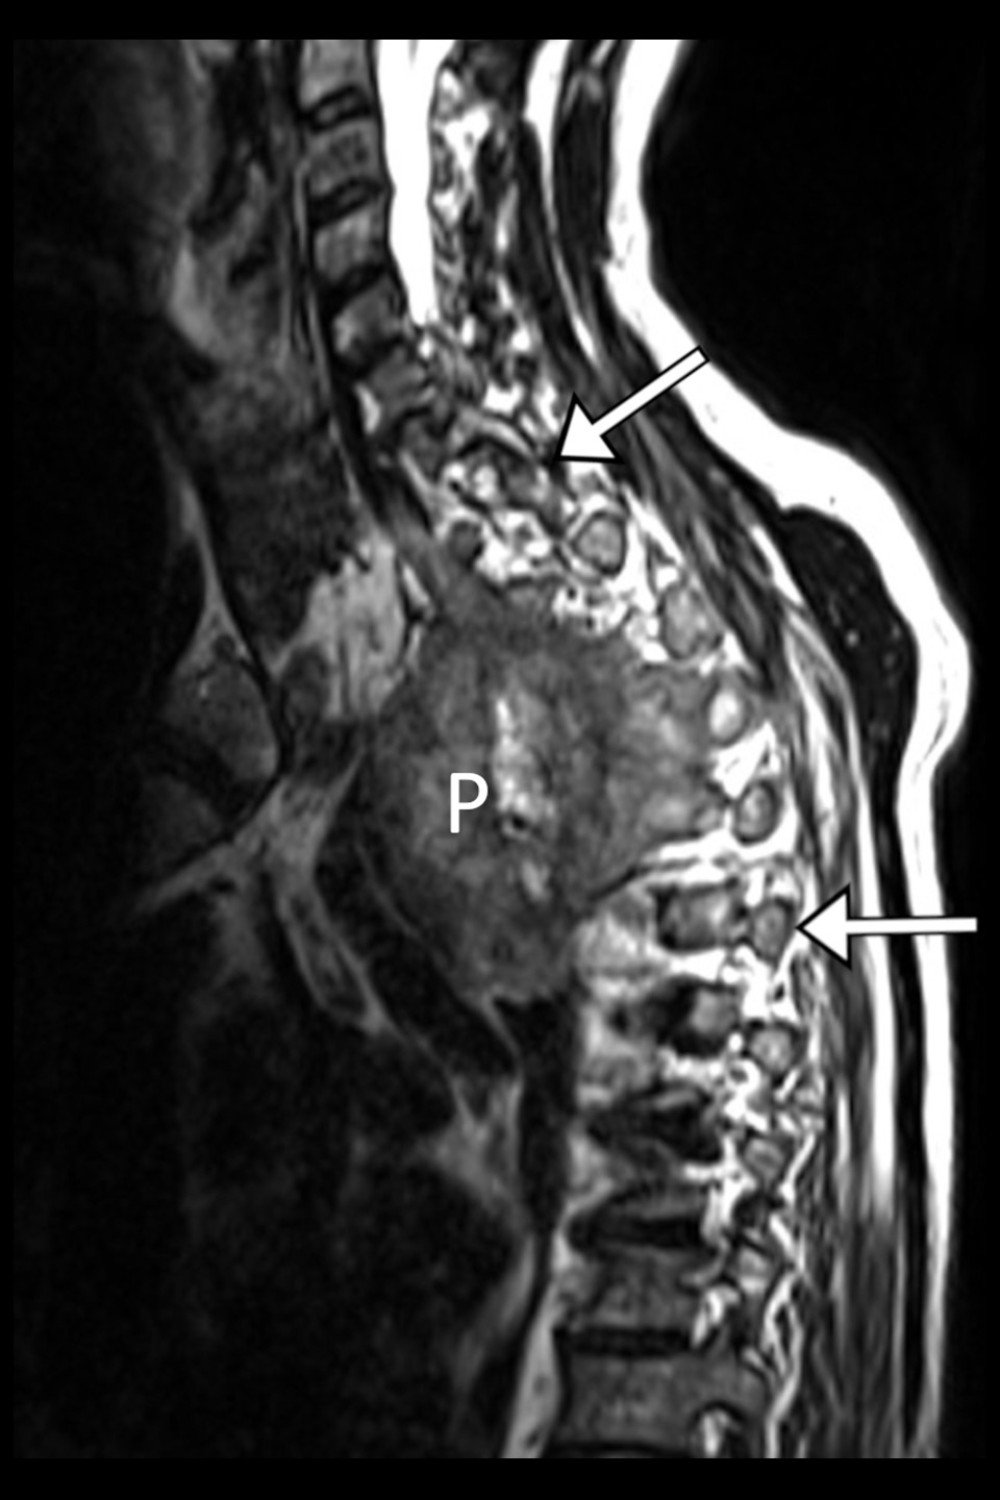 Thoracic spine T2-weighted MRI, right parasagittal view. The Pancoast tumor (P) is evident as a paraspinal mass anterior to and invading the upper-to-midthoracic spine. An abnormal hyperintense signal is seen in the thoracic vertebrae and/or ribs from T1 (upper arrow) through T6 (lower arrow), suggestive of tumor infiltration. The craniocaudal dimension of the mass is 8.7 centimeters (measurement not shown).